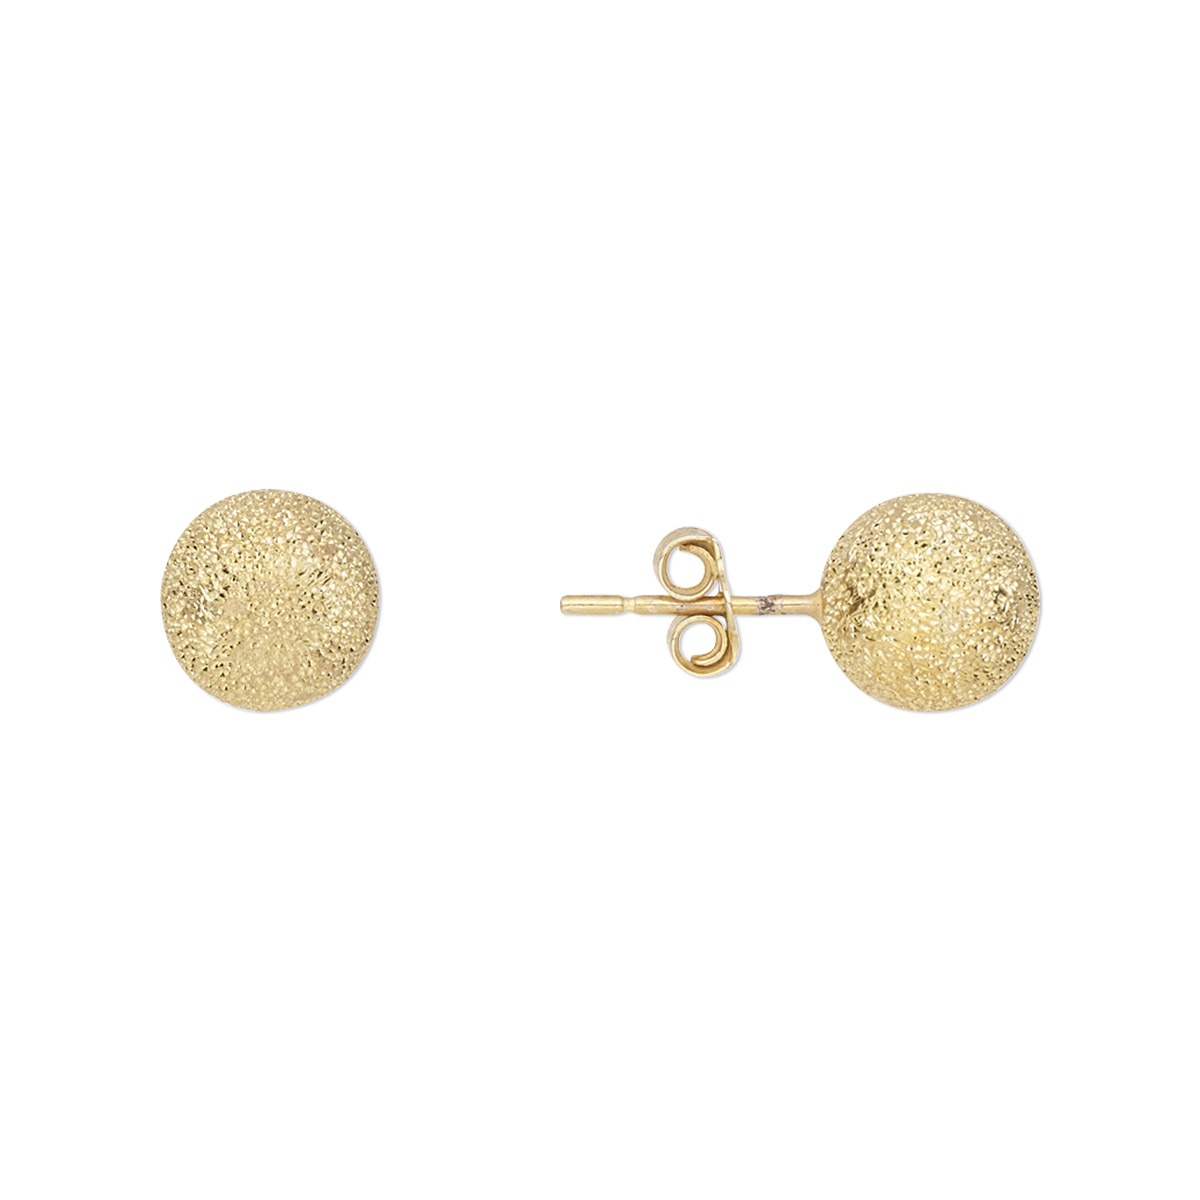 Earstud, gold-finished sterling silver, 8mm stardust ball with post ...